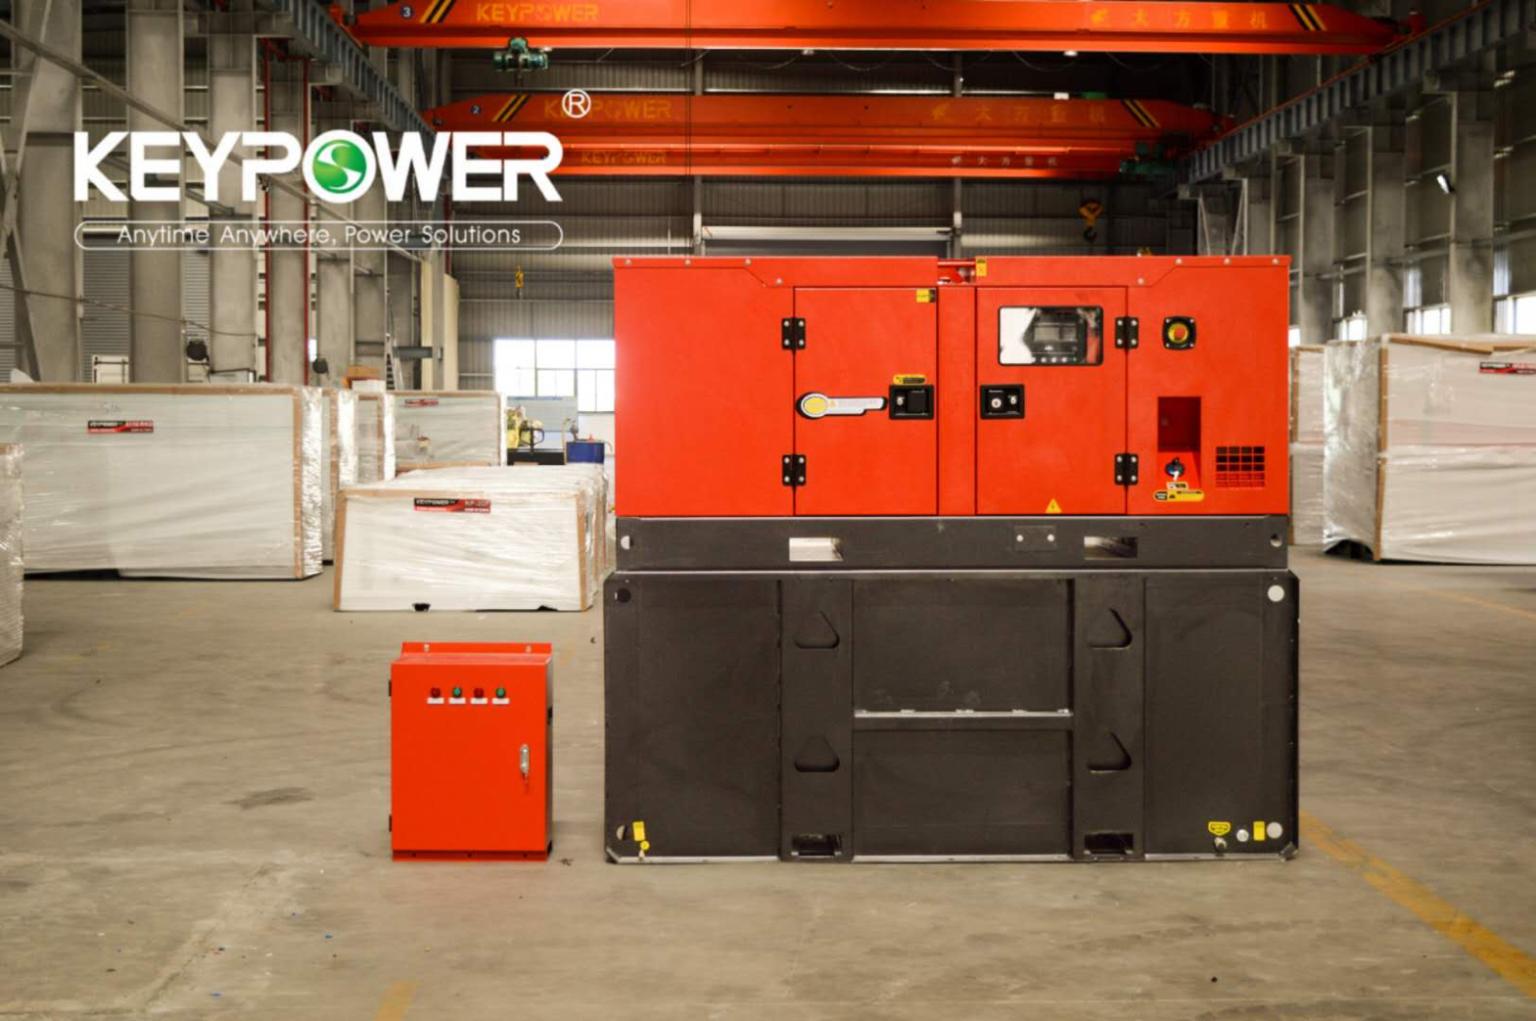 What is the difference between a diesel generator set and a gasoline generator set?